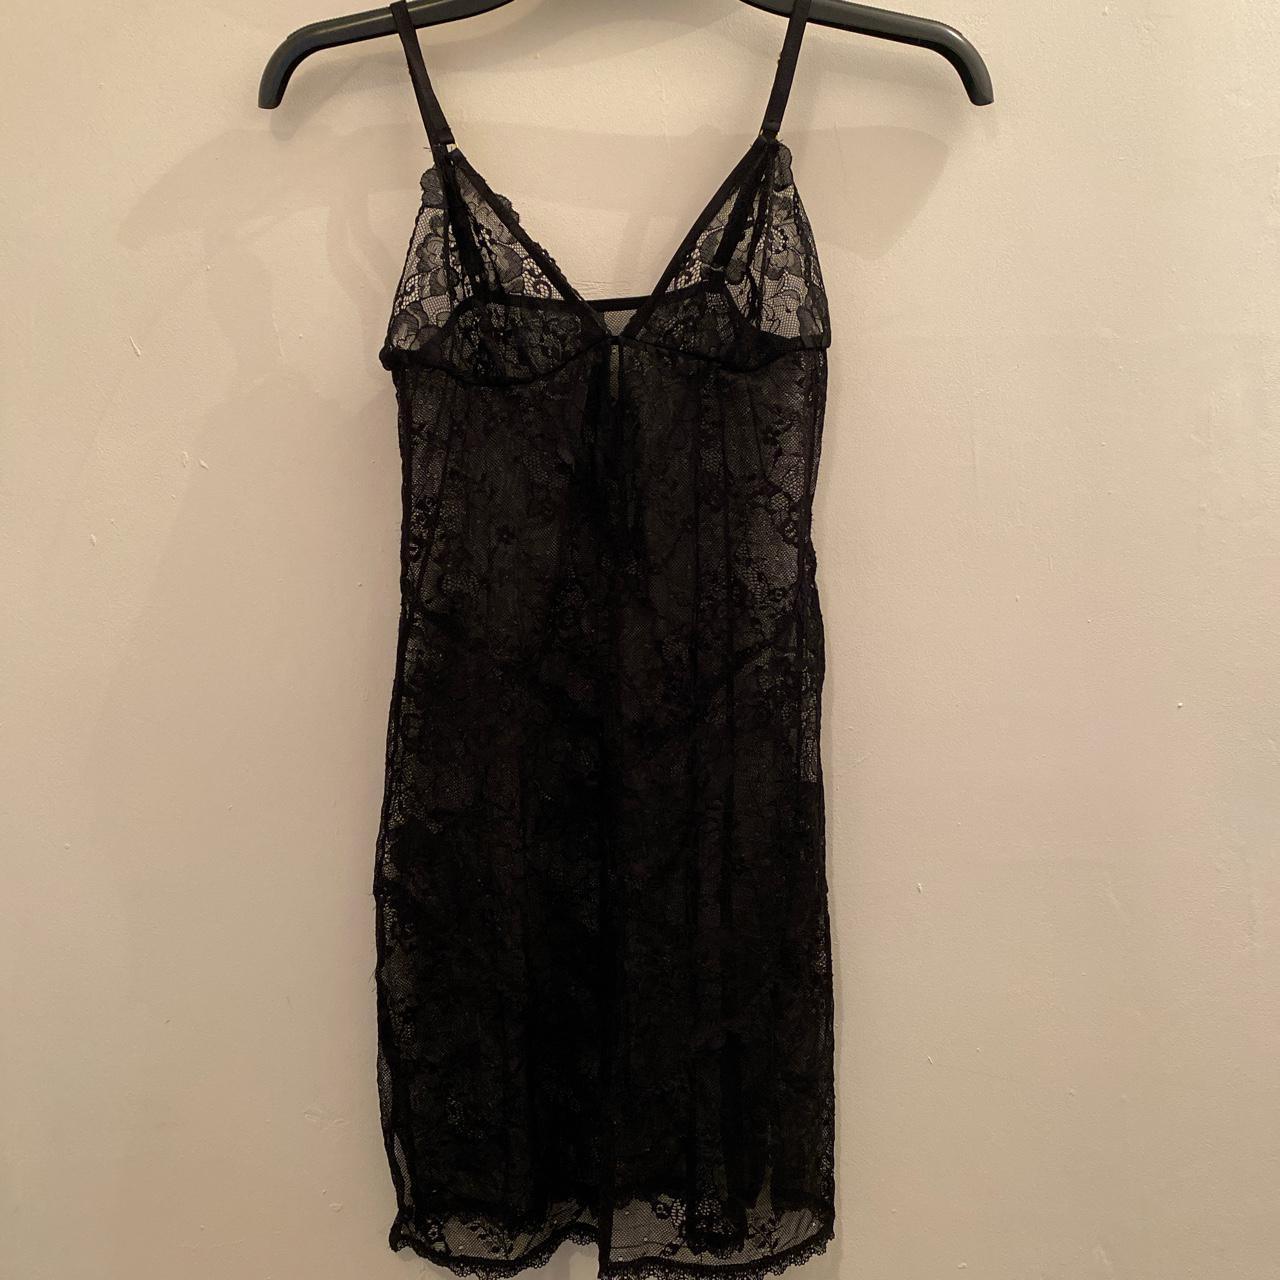 Ann summers Cleo Lace Chemise in black (night dress)... - Depop